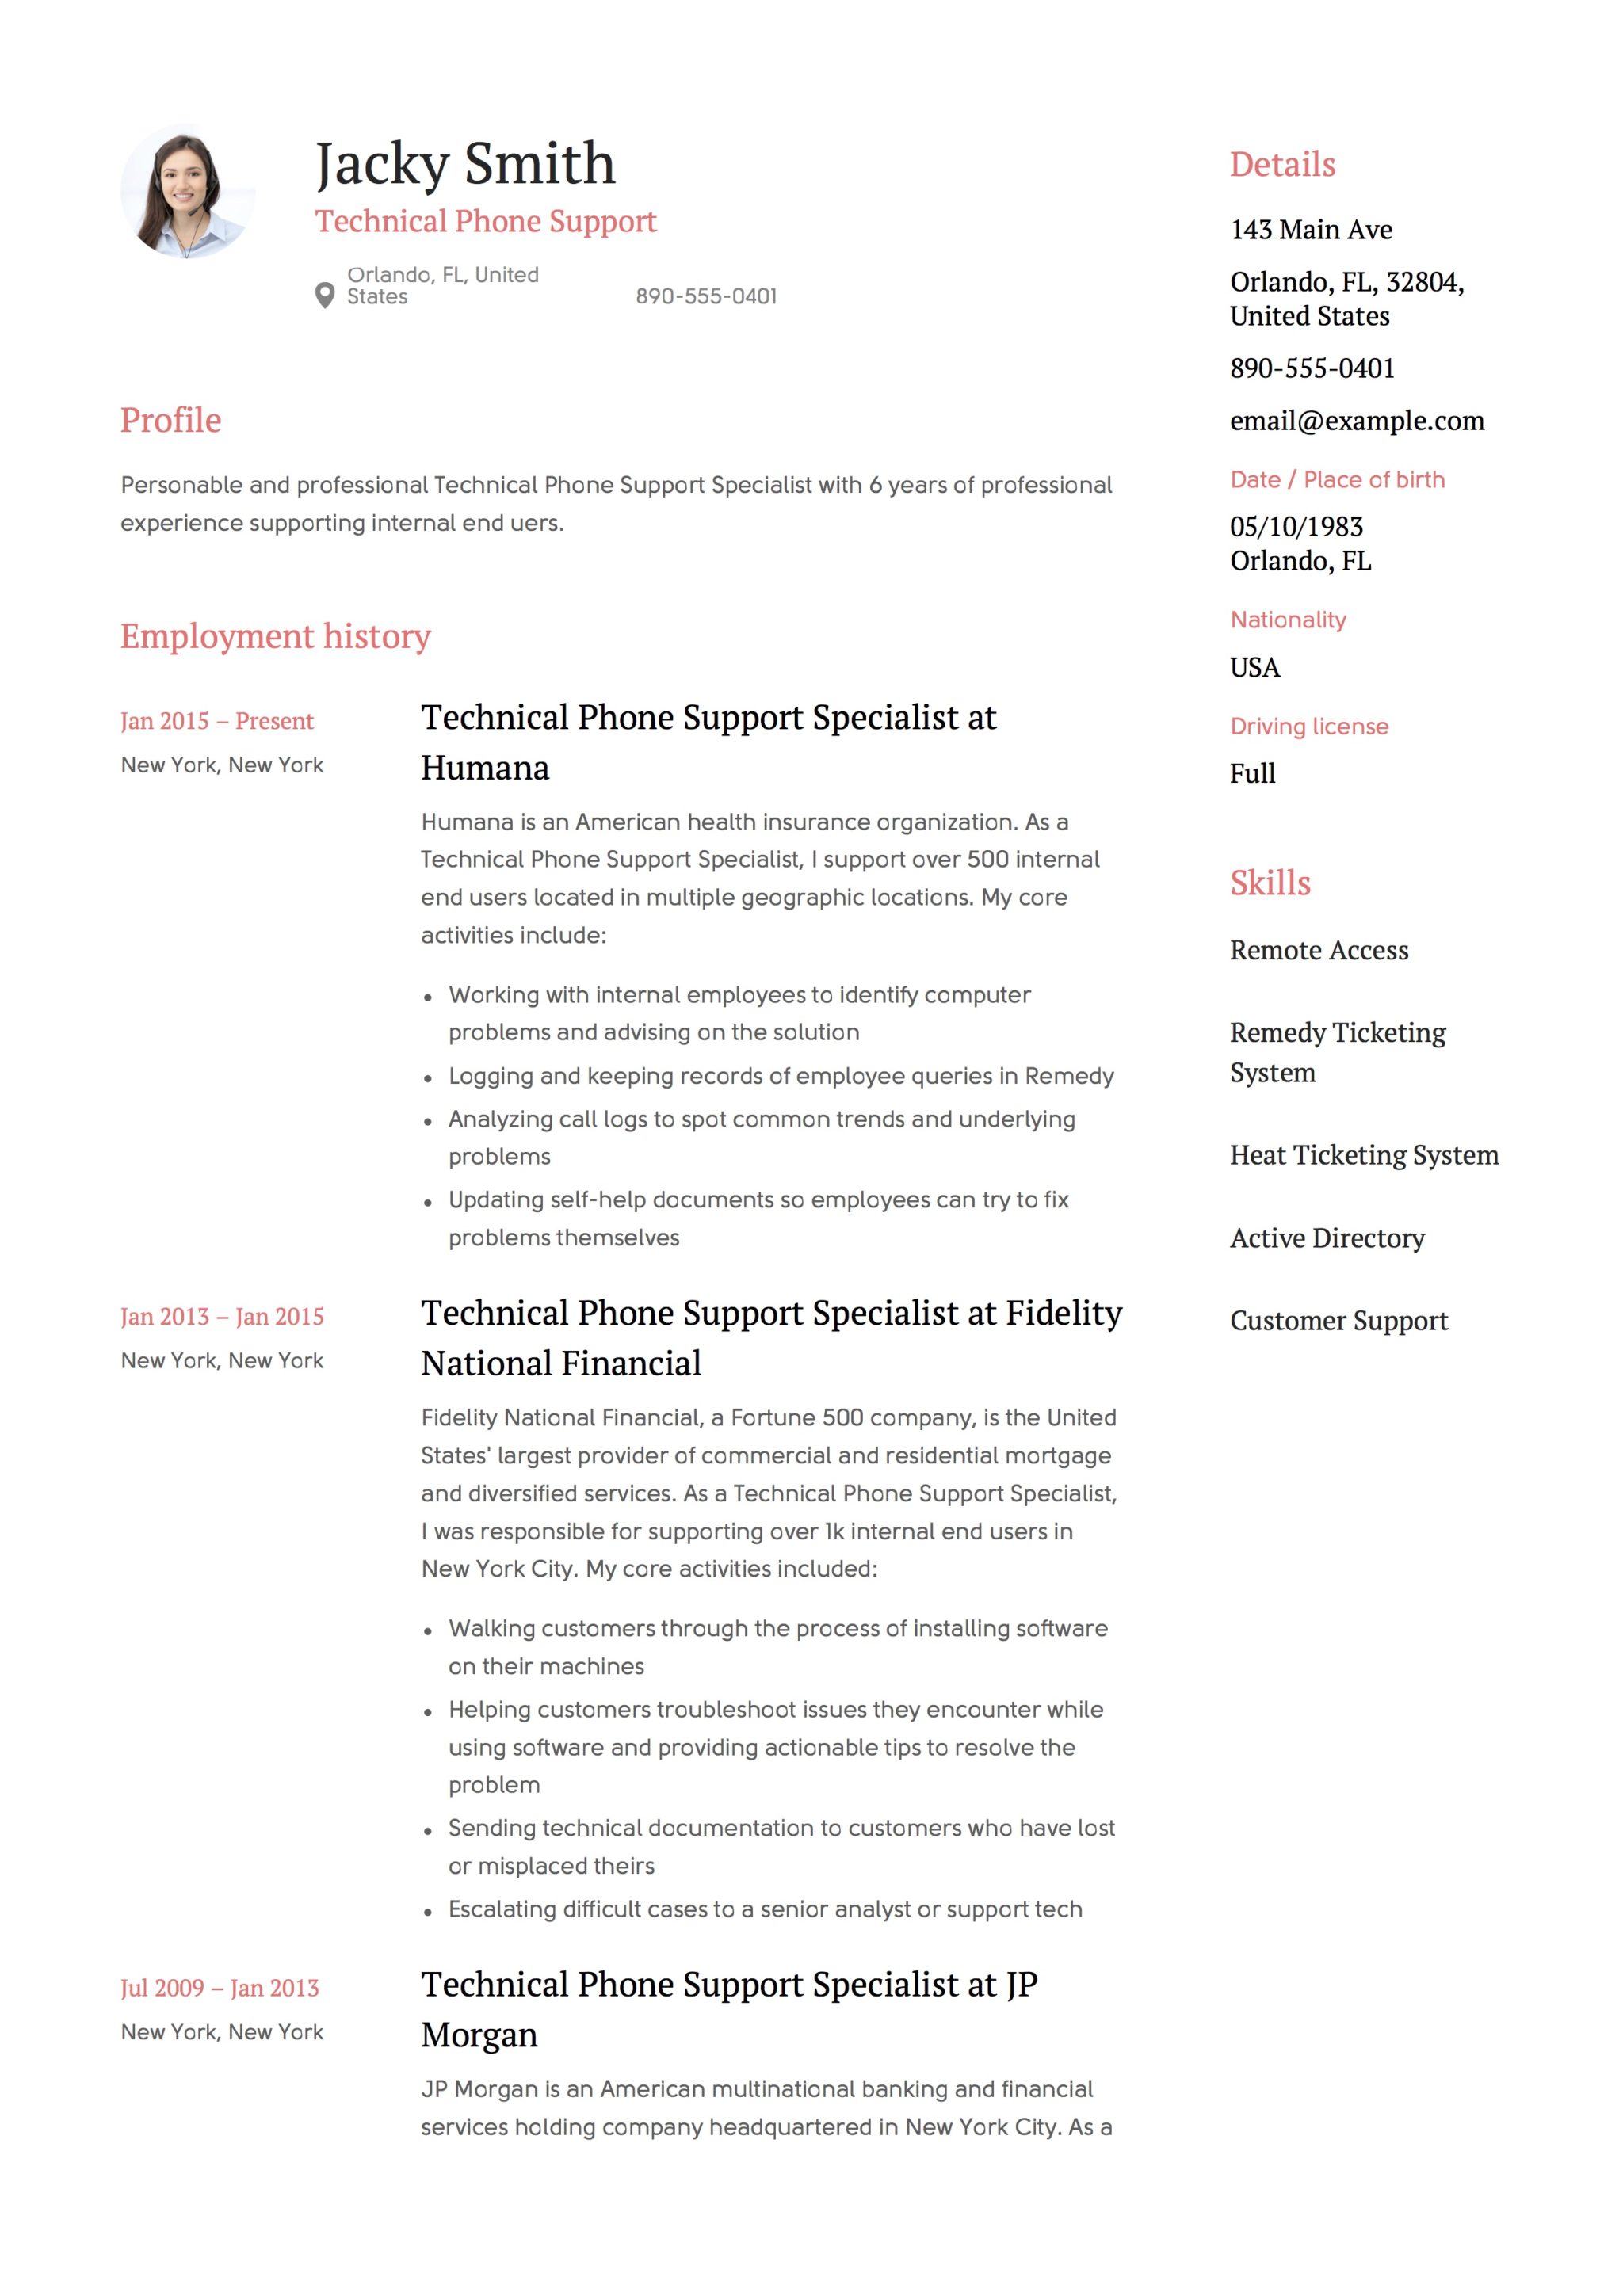 Template Resume - Technical Phone Support with photo